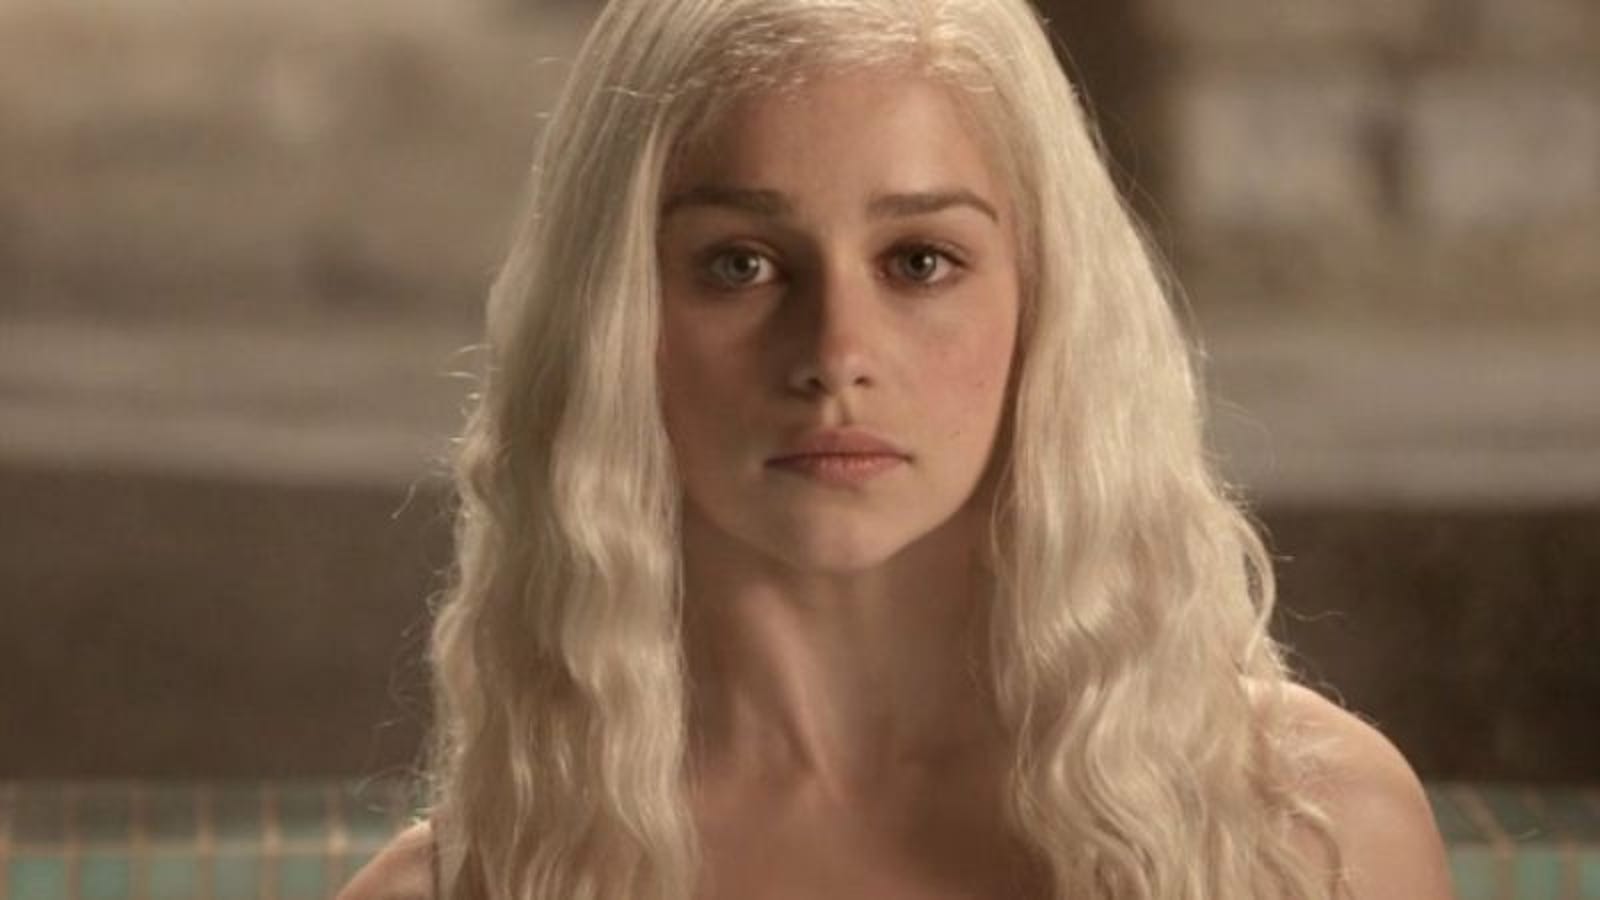 Ggame Of Thrones Nude Scenes Tumblr Sanyconsulting